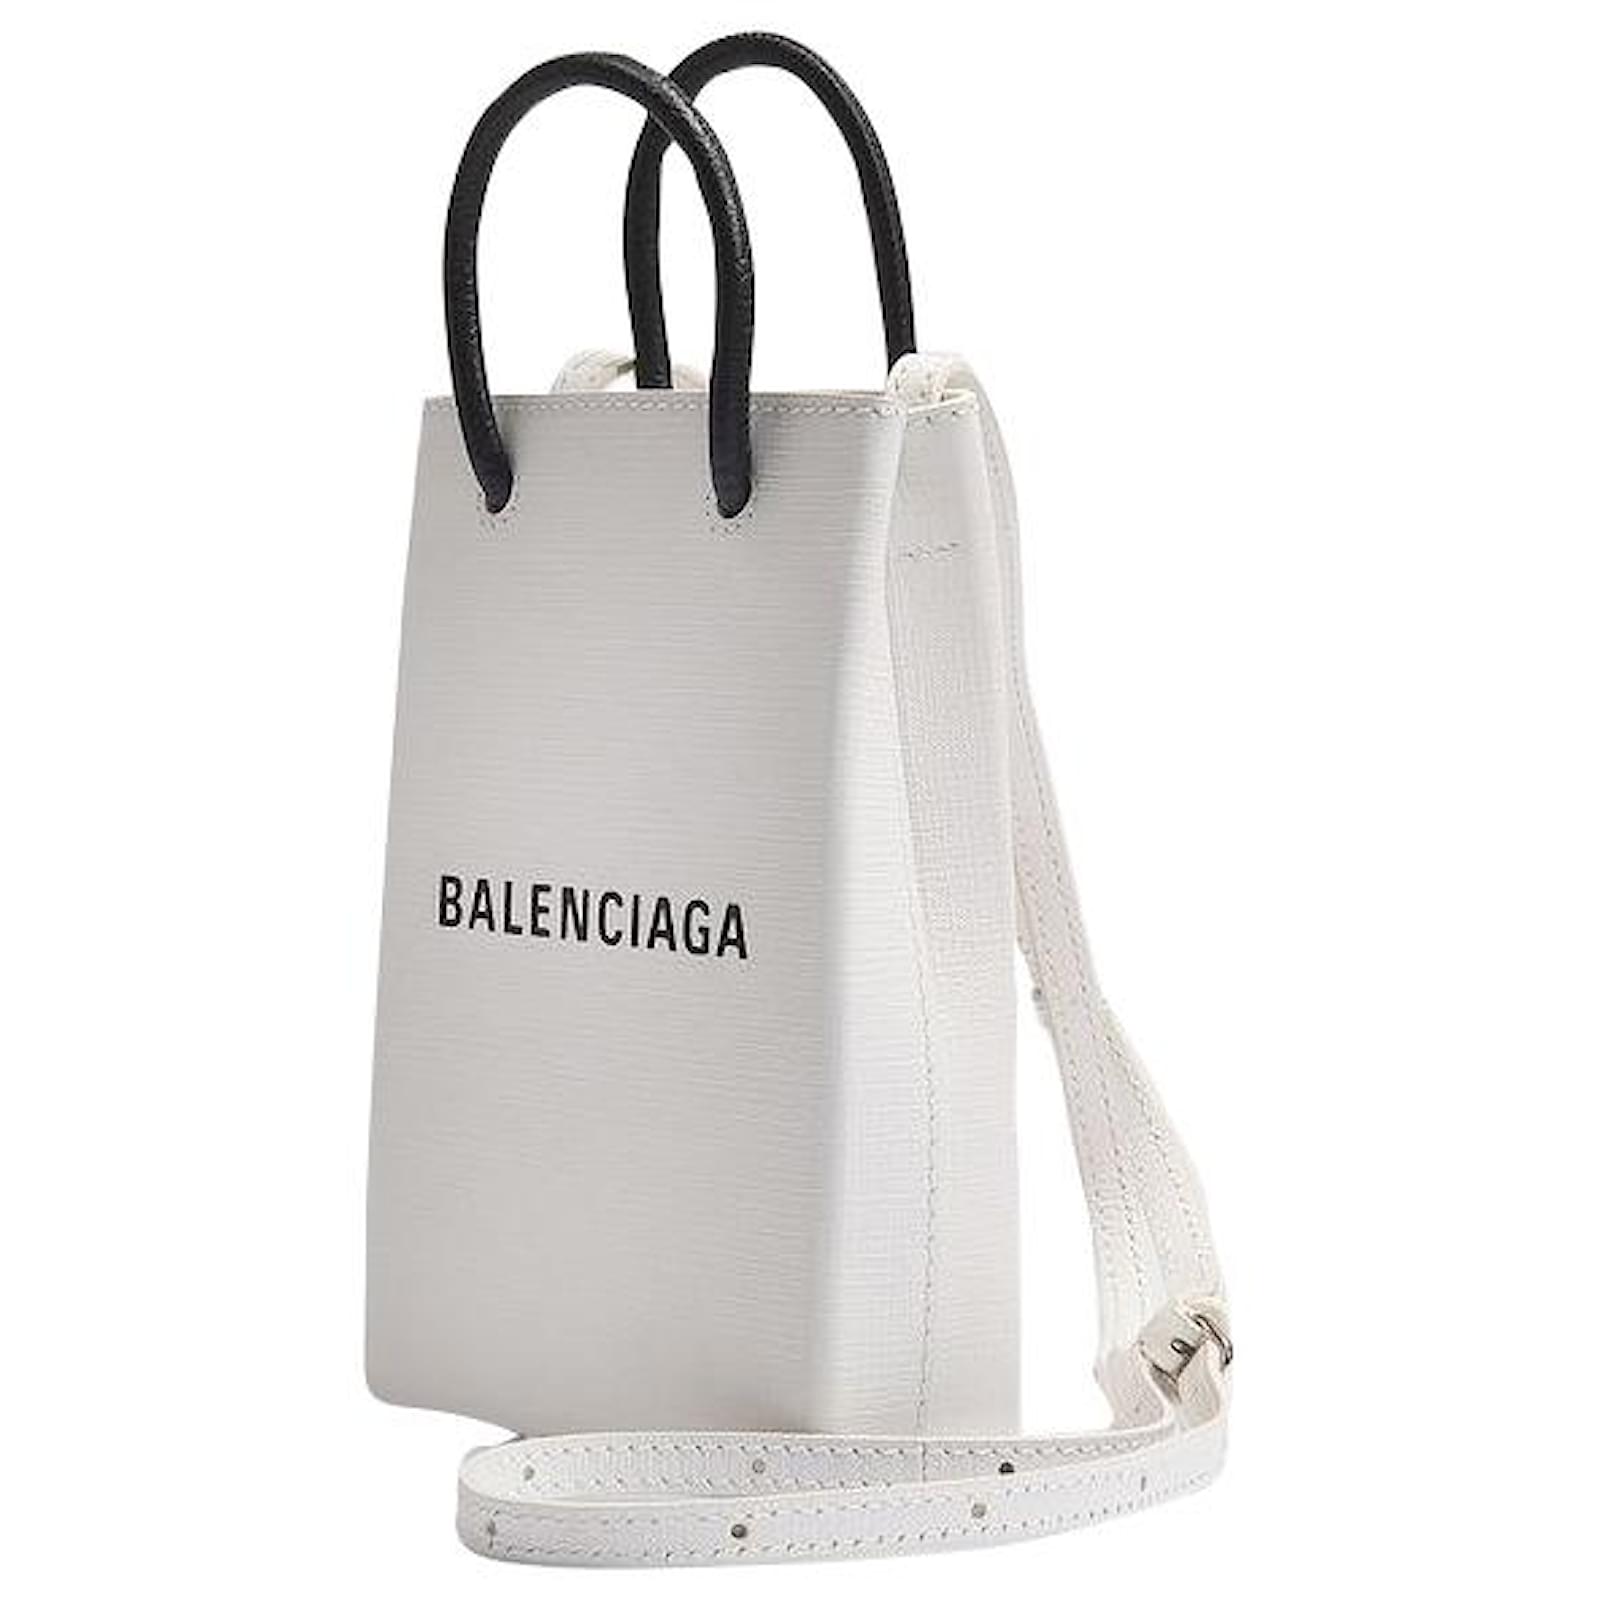 Shopping Phone Holder Bag in White Leather